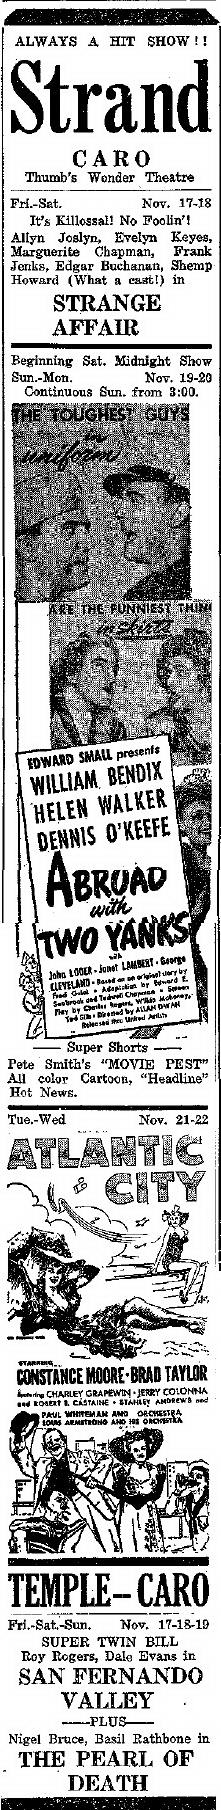 Temple Theatre - NOV 17 1944 STRAND AND TEMPLE GOING HEAD TO HEAD